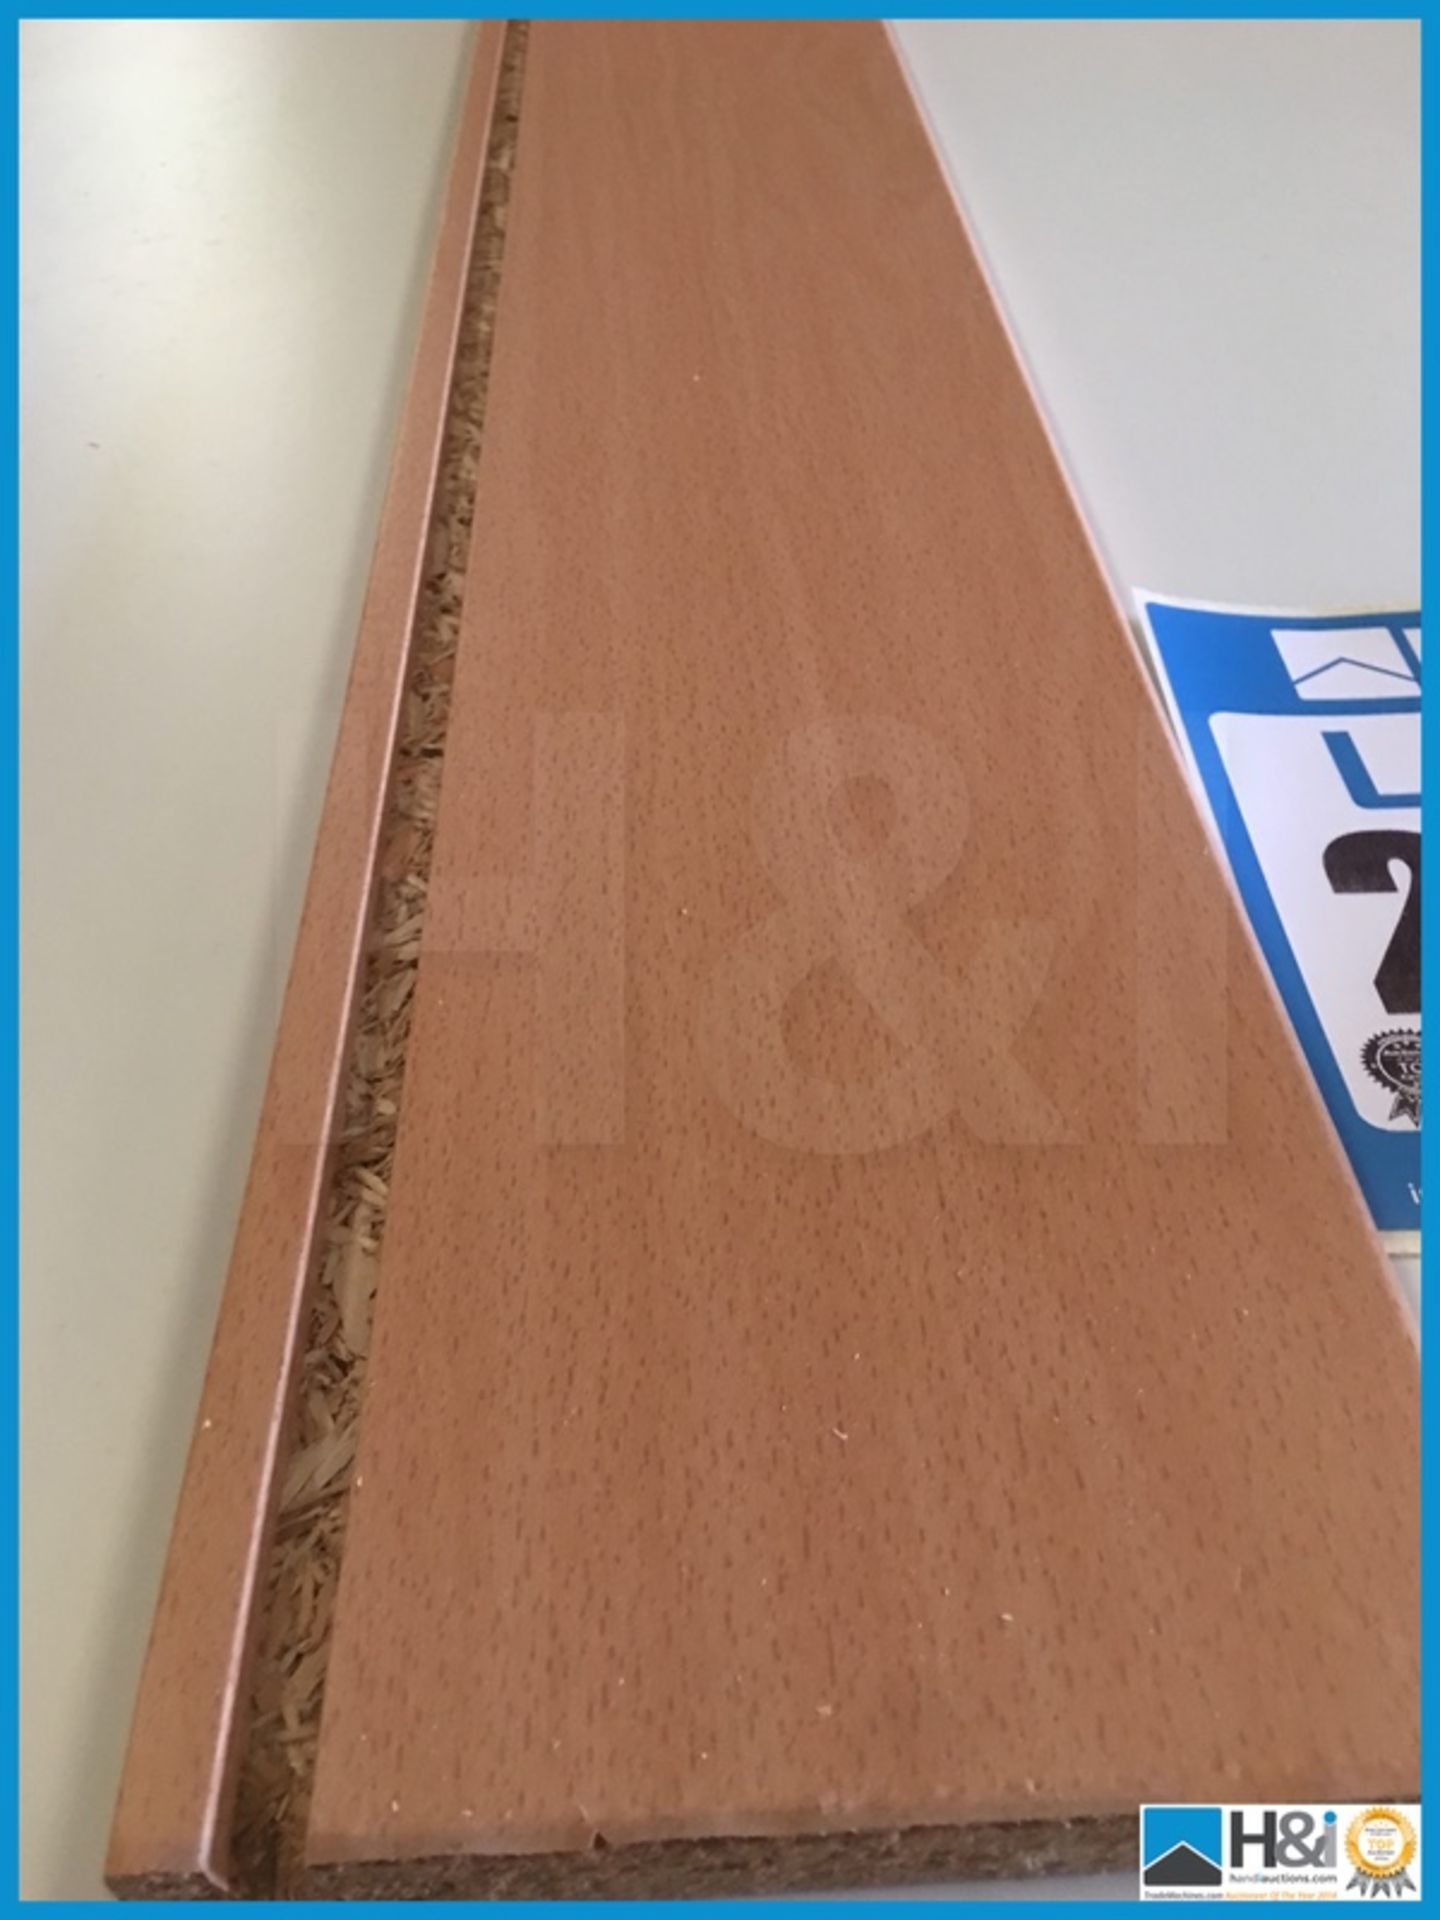 X 100 2020 mm X 142 mm x12.6 mm beech drawer sides Appraisal: Excellent Serial No: NA Location: West - Image 2 of 2